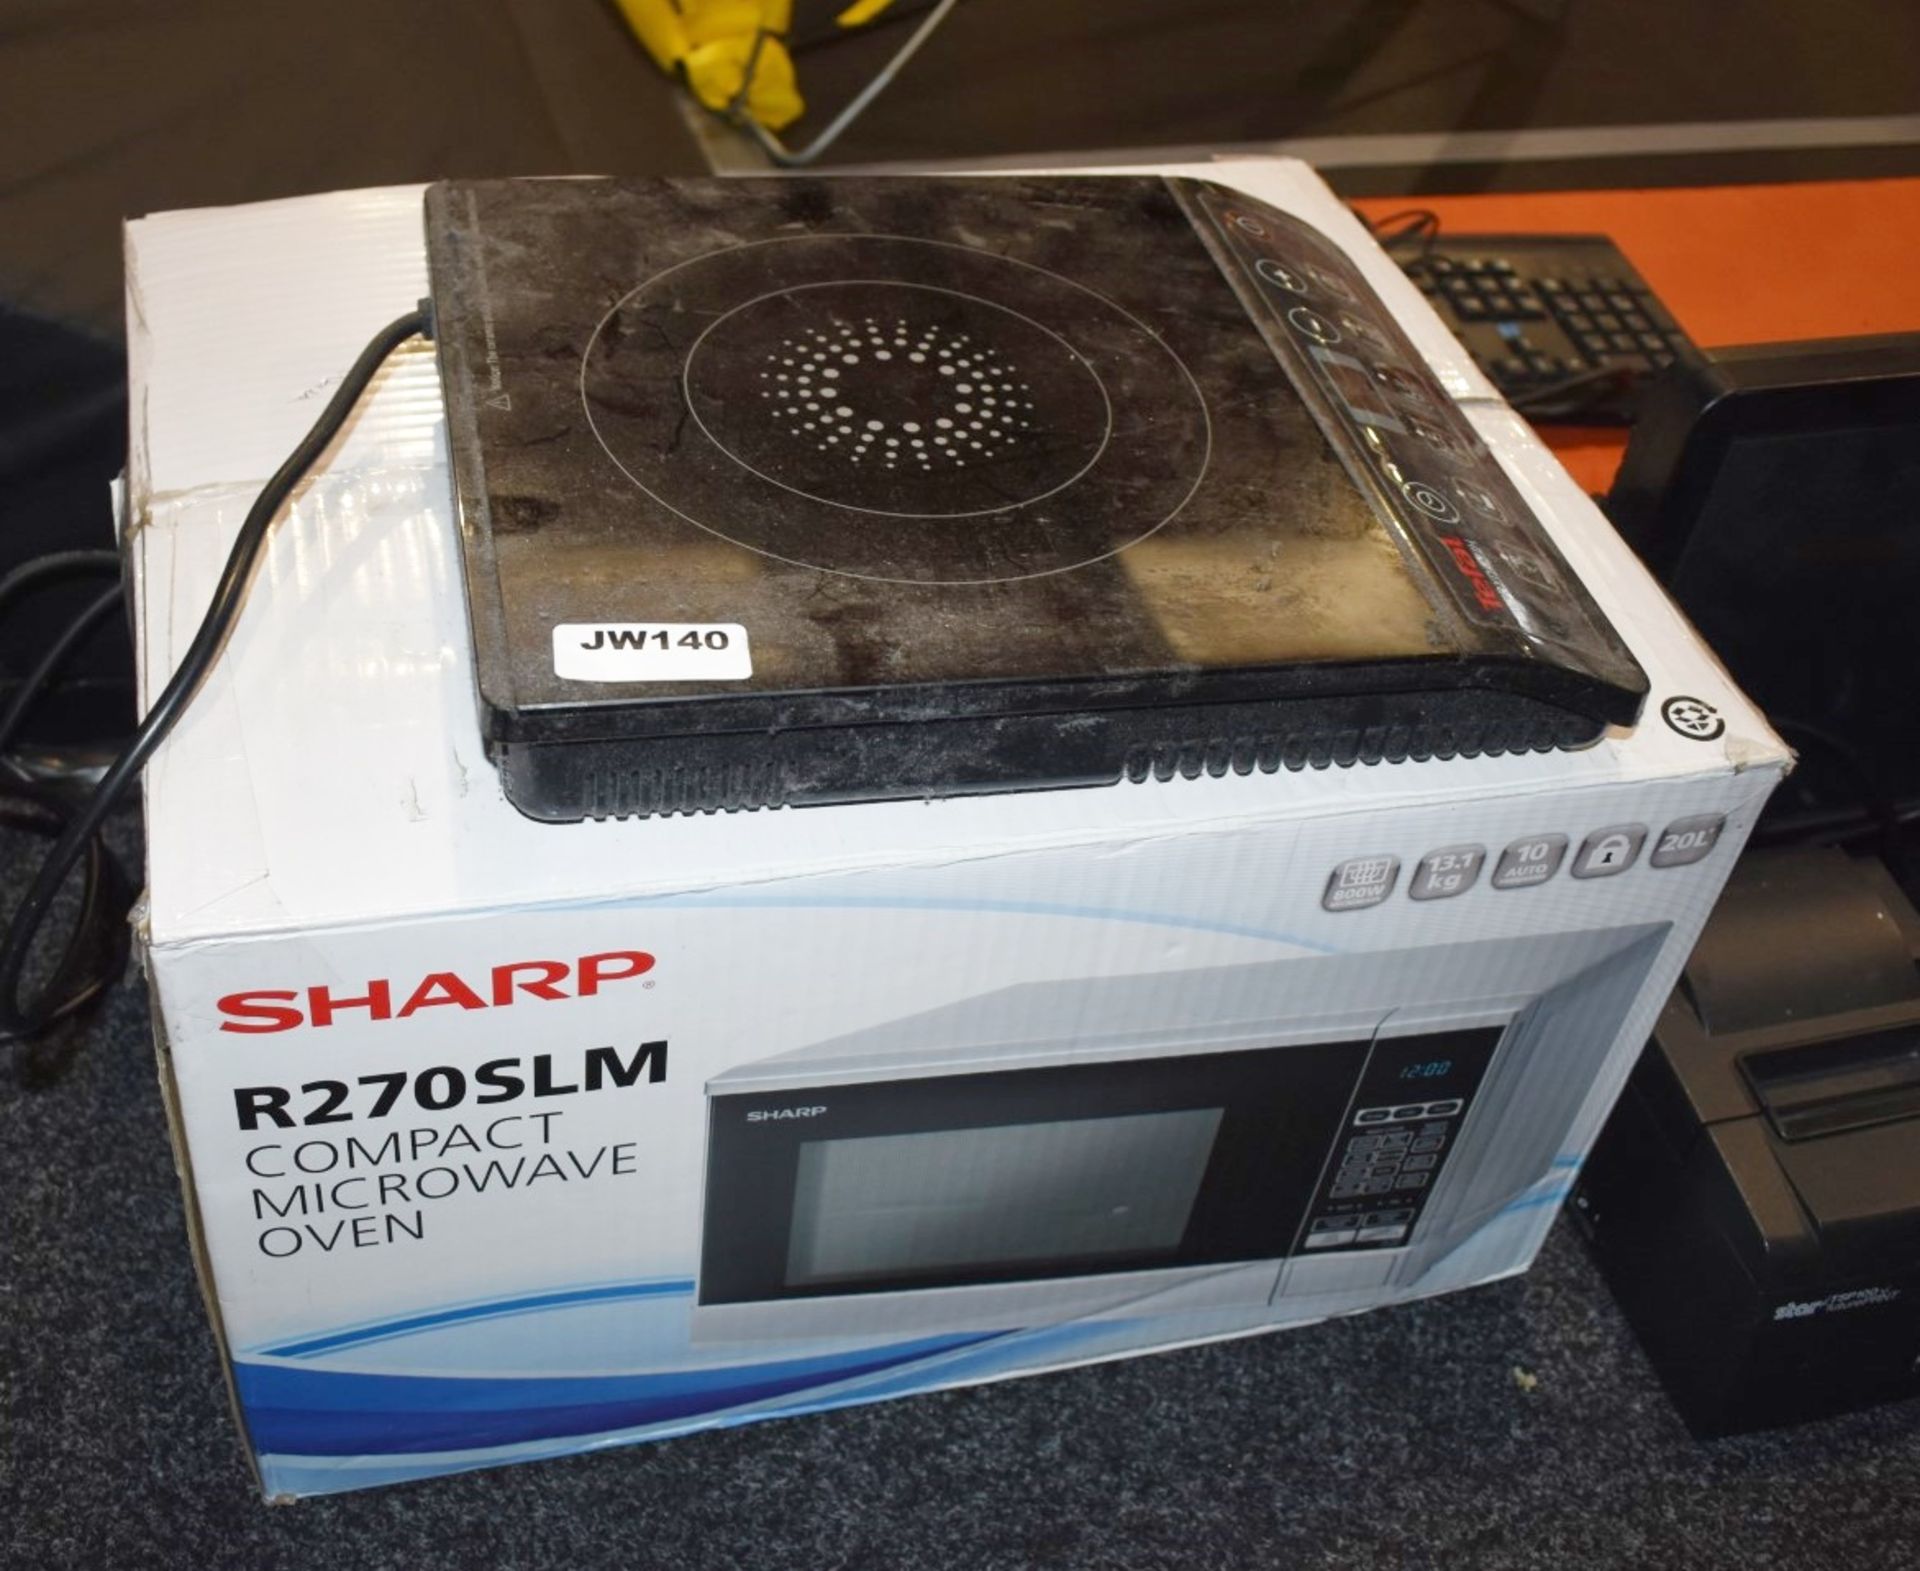 1 x Unused Sharp R270SLM Microwave Oven and  1 x Tefal Single Cooking Hob - Ref: JW140 - CL511 -